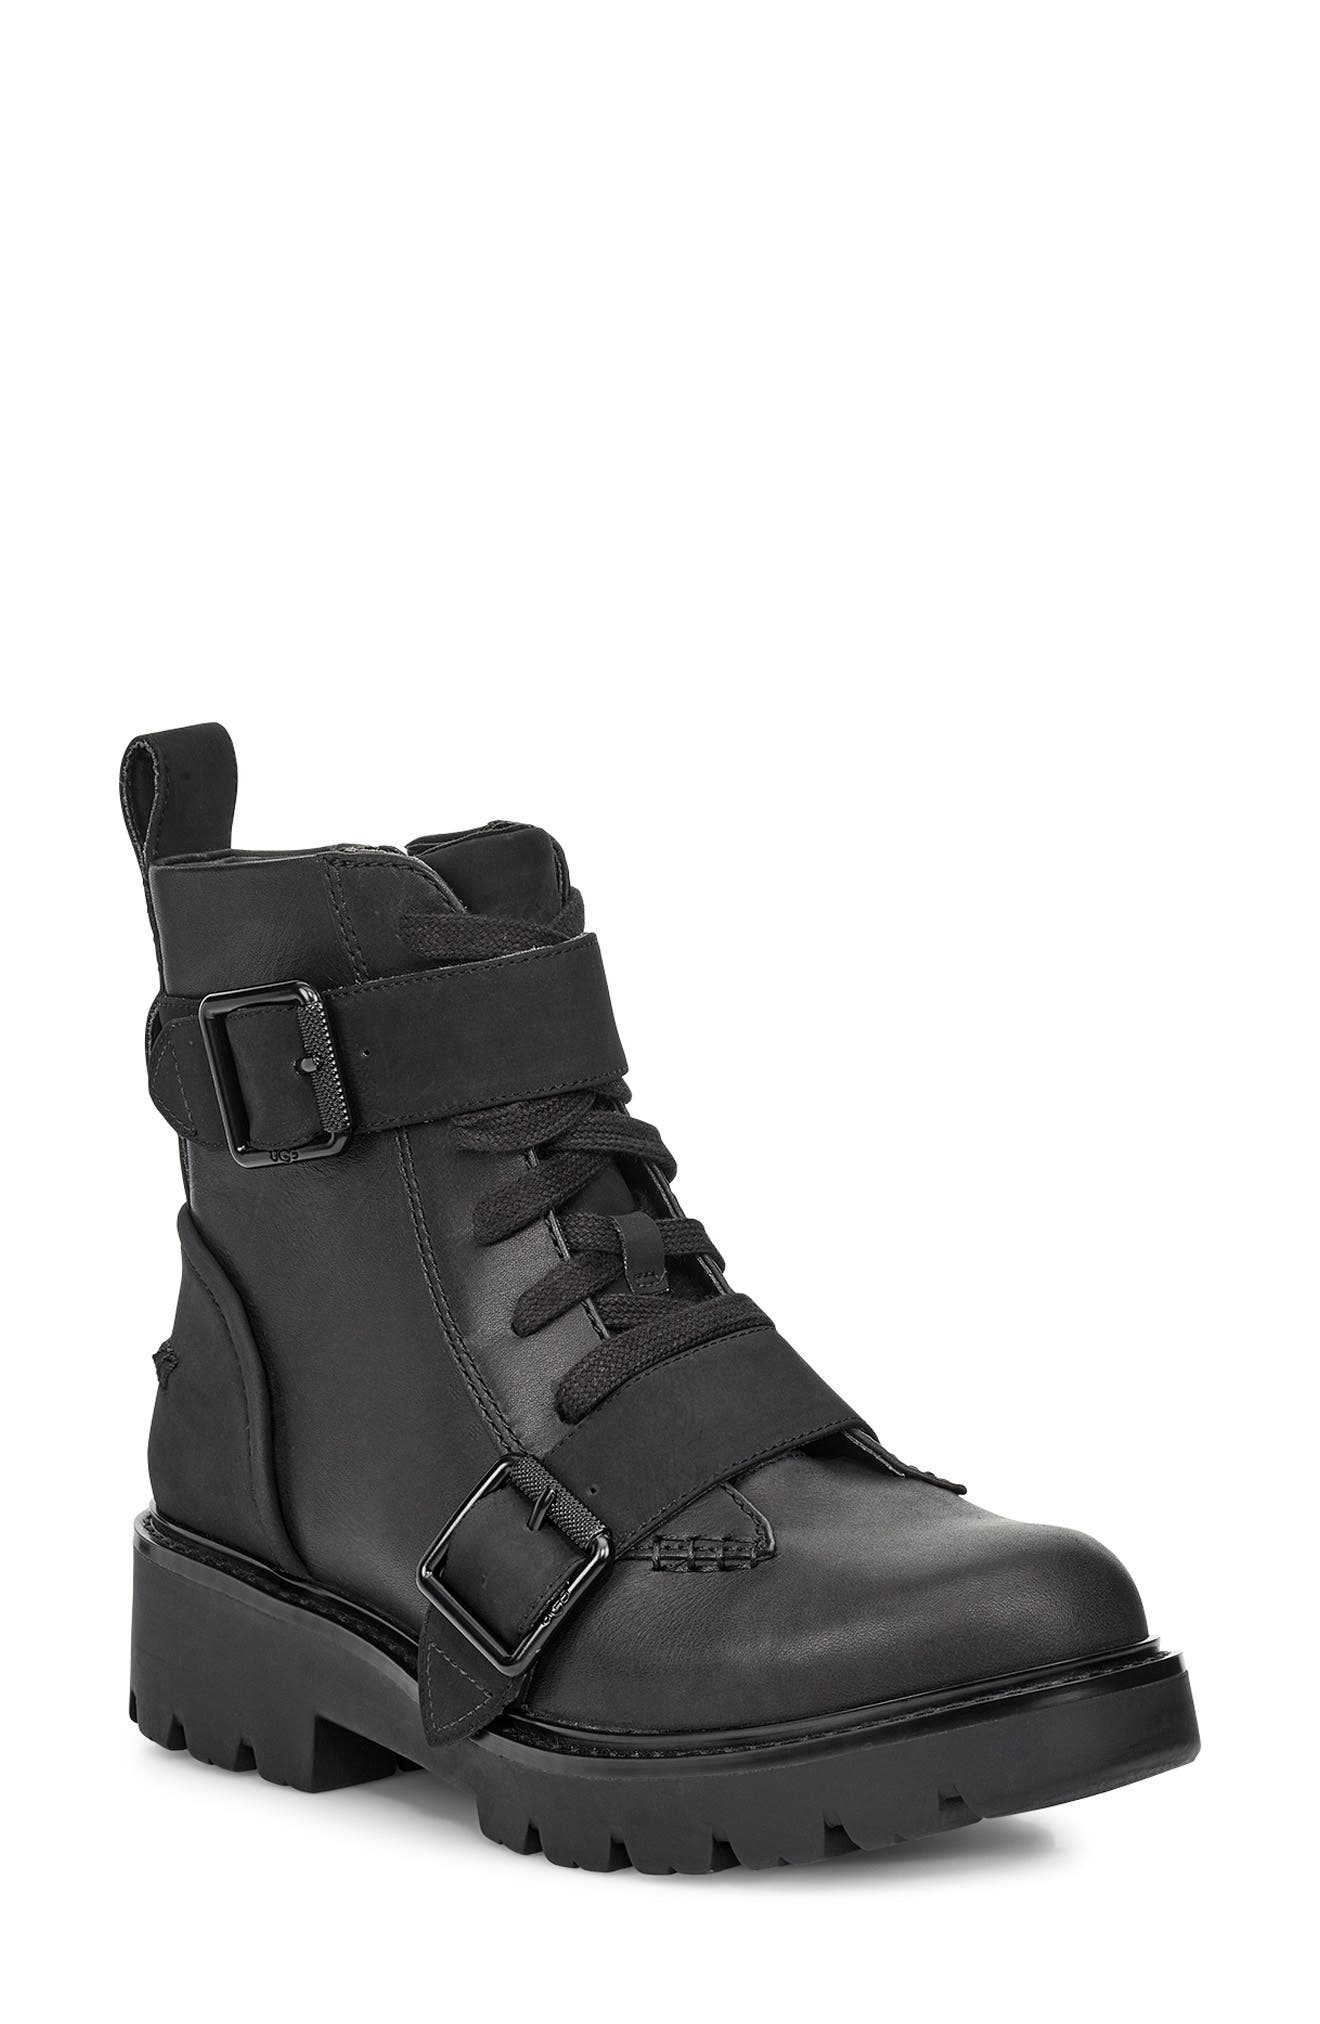 womens black leather moto boots